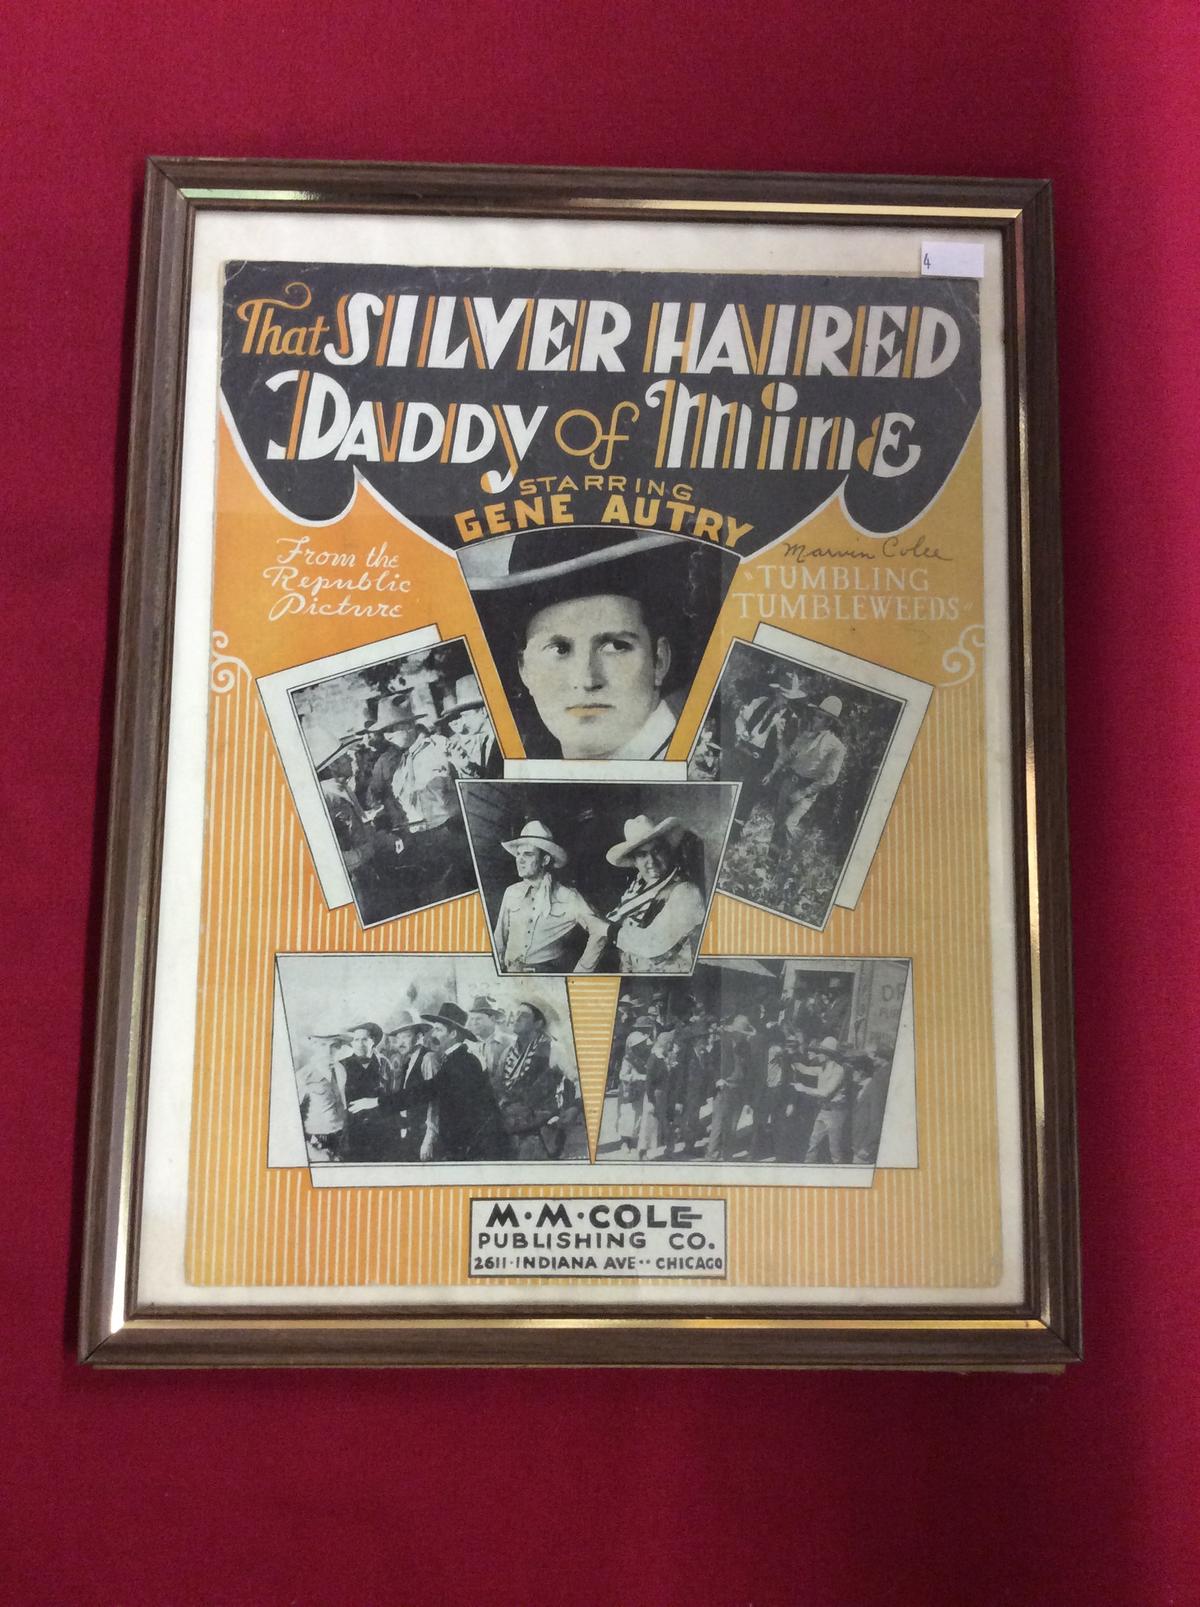 "That Silver Haired Daddy of Mine" Starring Gene Autry Framed Poster